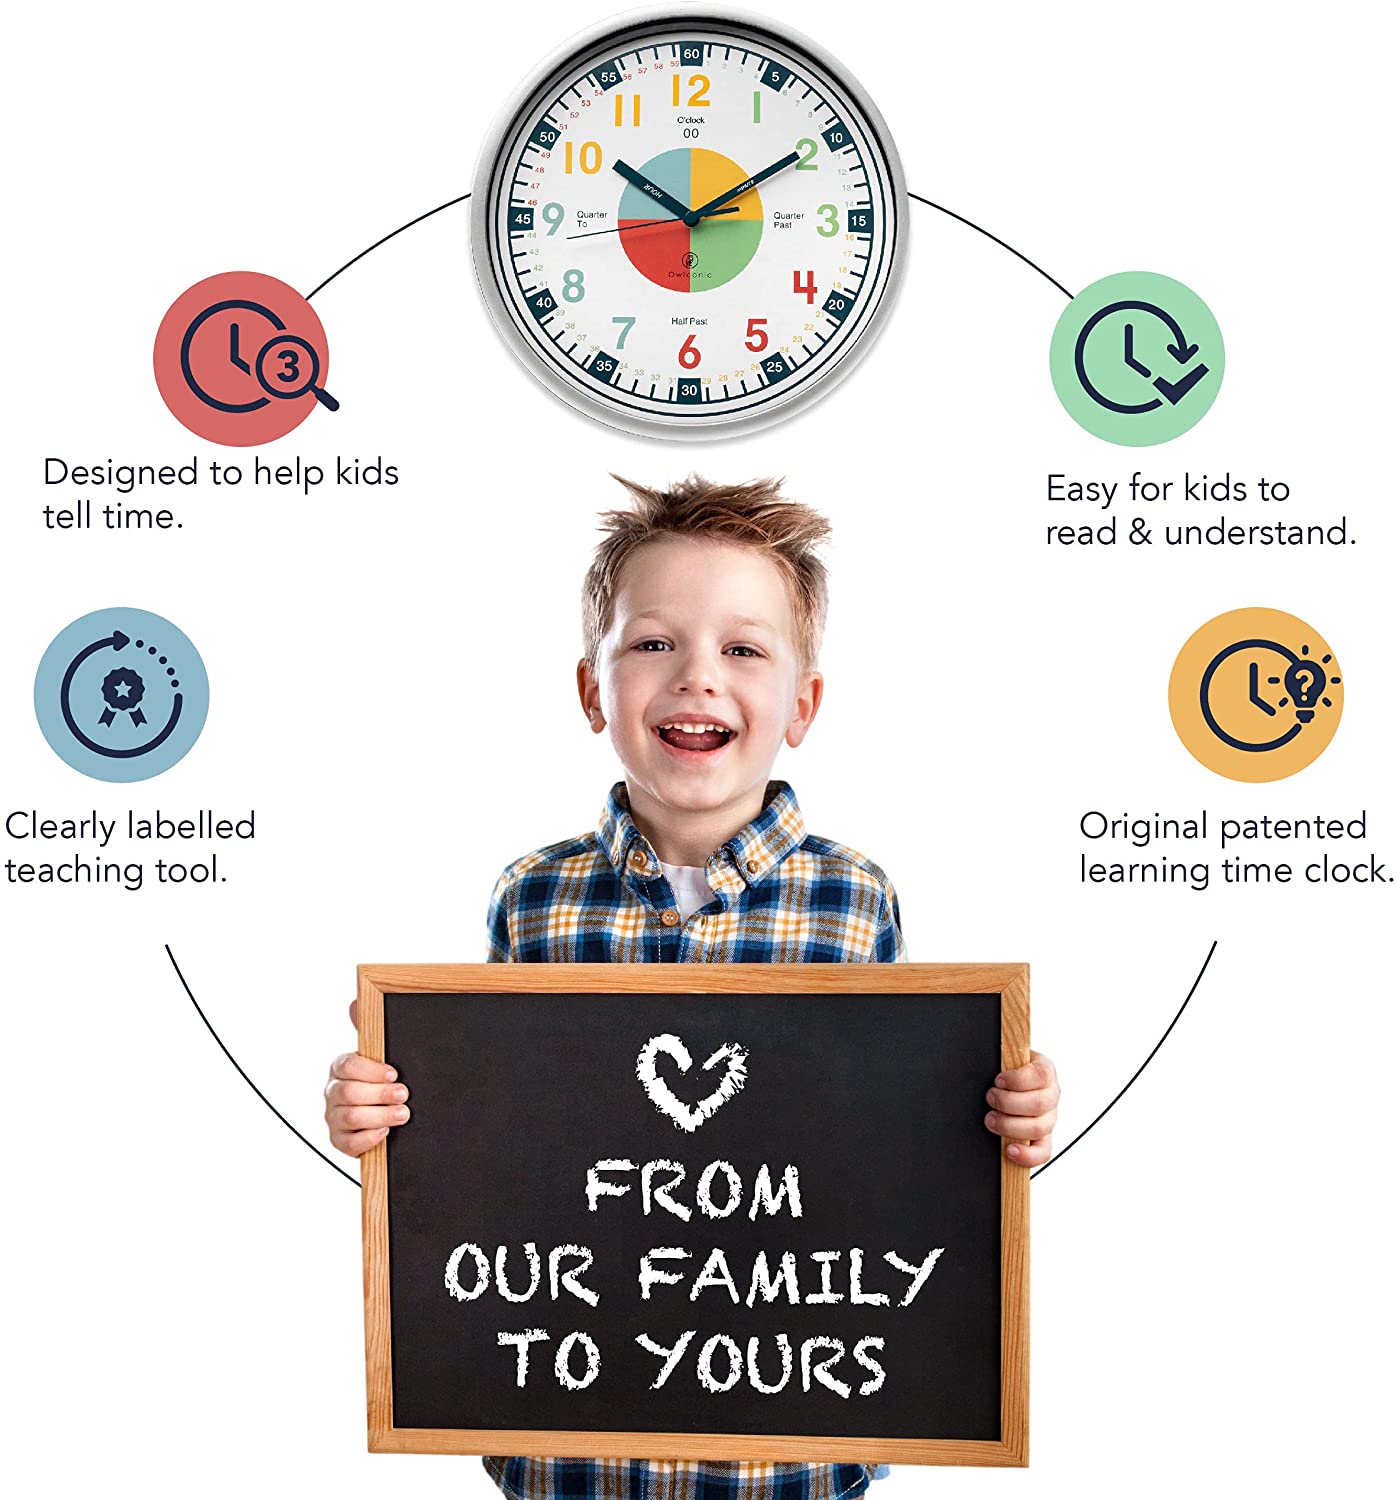 Telling Time Analogue Silent Wall Clock (Standard). Perfect Educational Tool for Homeschool, Classroom, Teachers and Parents